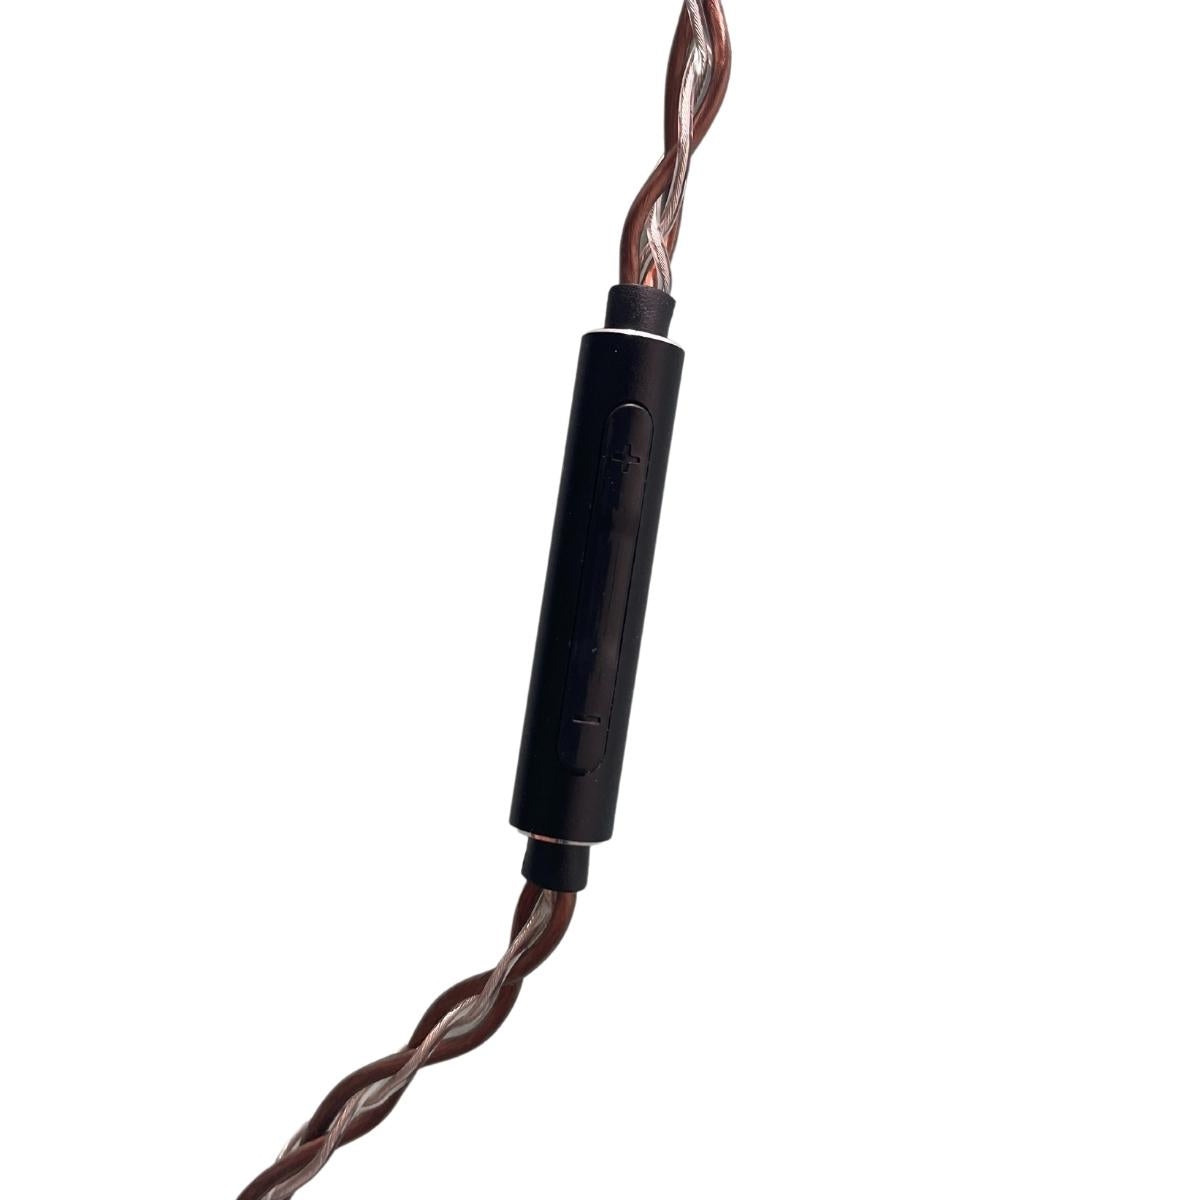 XINHS 8 Core Cable With Mic For Sennheiser IE300/IE600/IE900